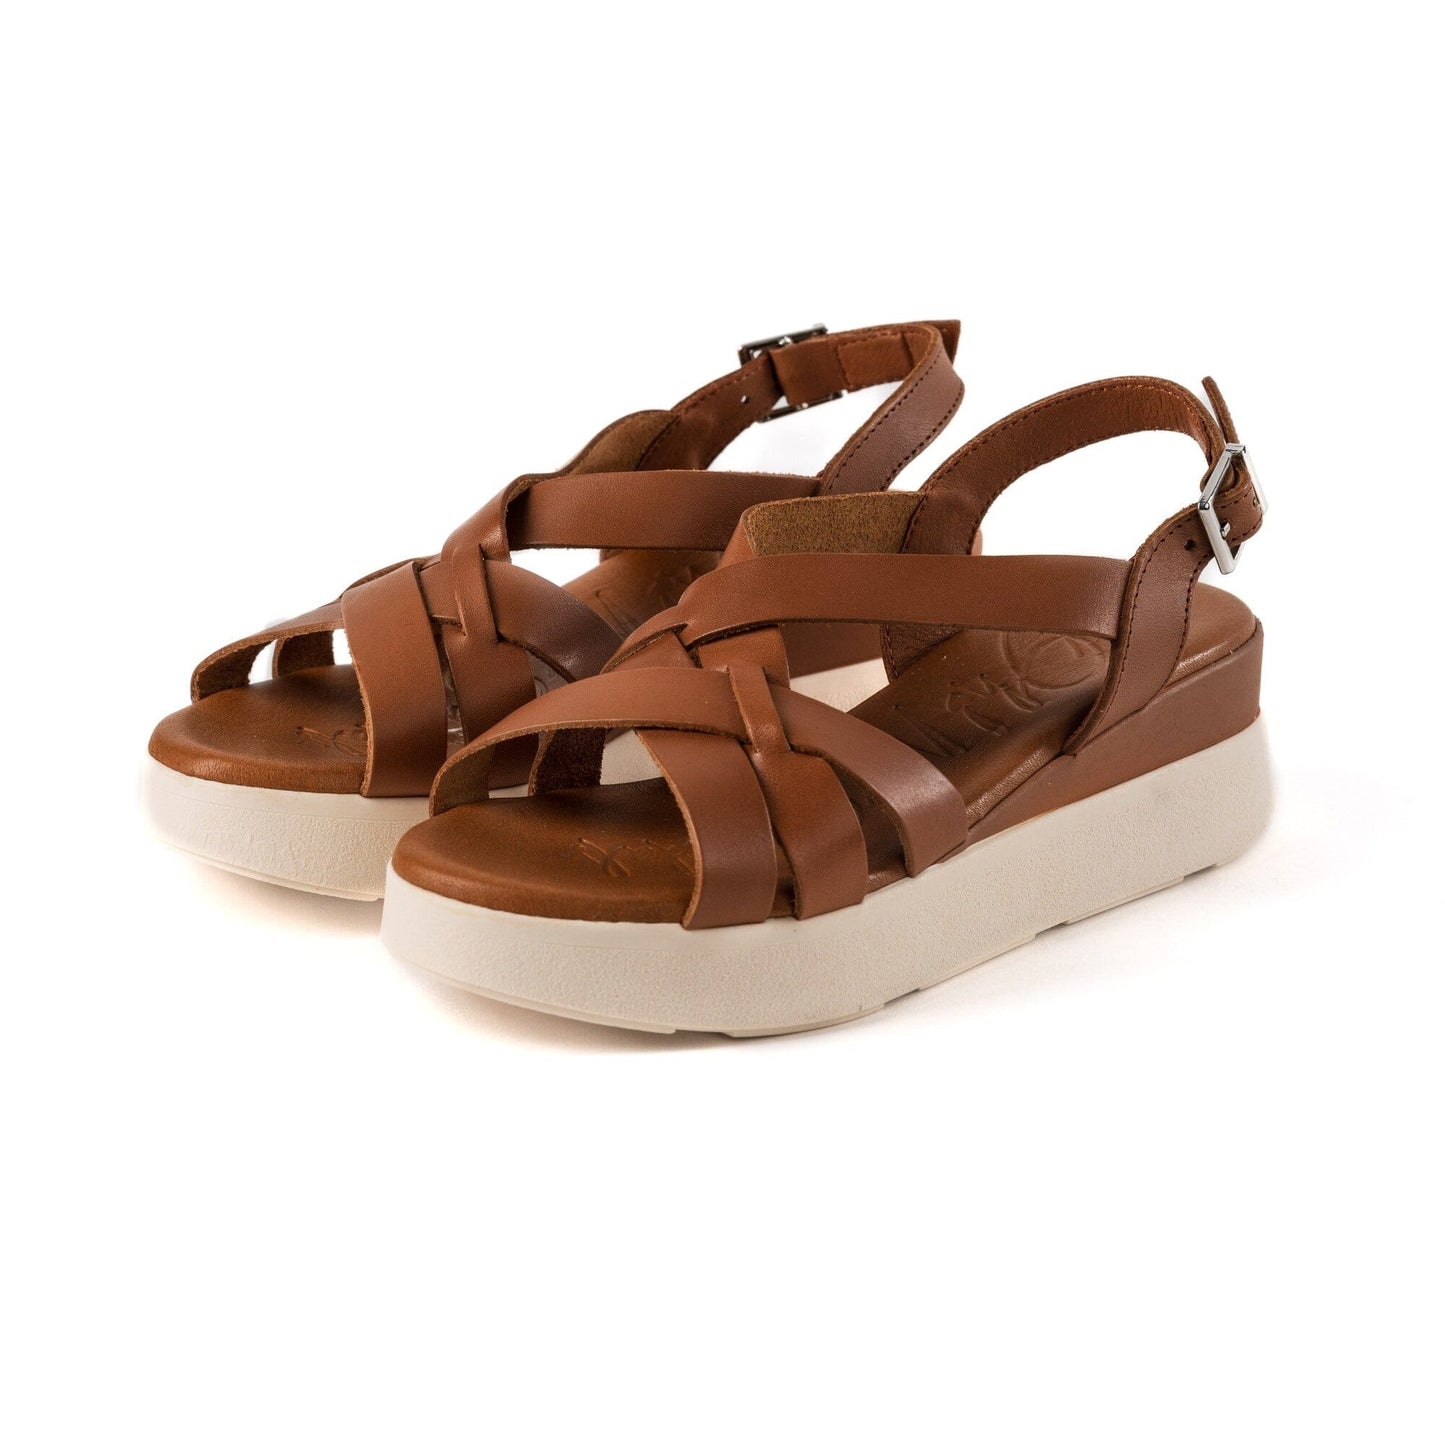 5188 Spanish leather crossed strappy sandals/wedge in Tan and Navy sandals Sam Star Shoes Tan 36/3 